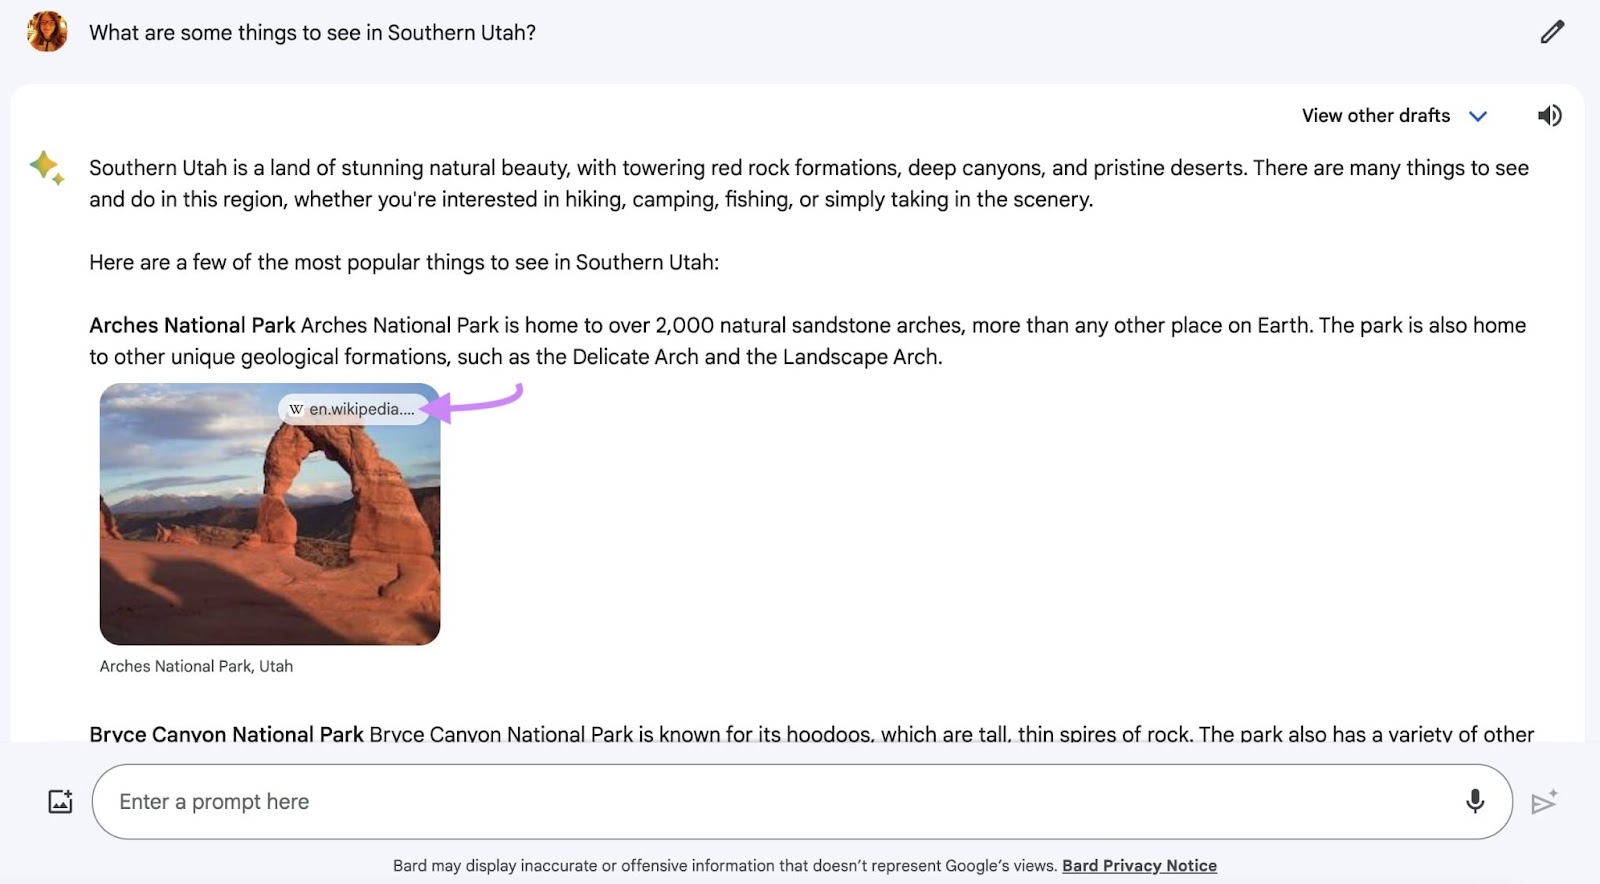 Bard's response to "What are some things to see in Southern Utah?" query